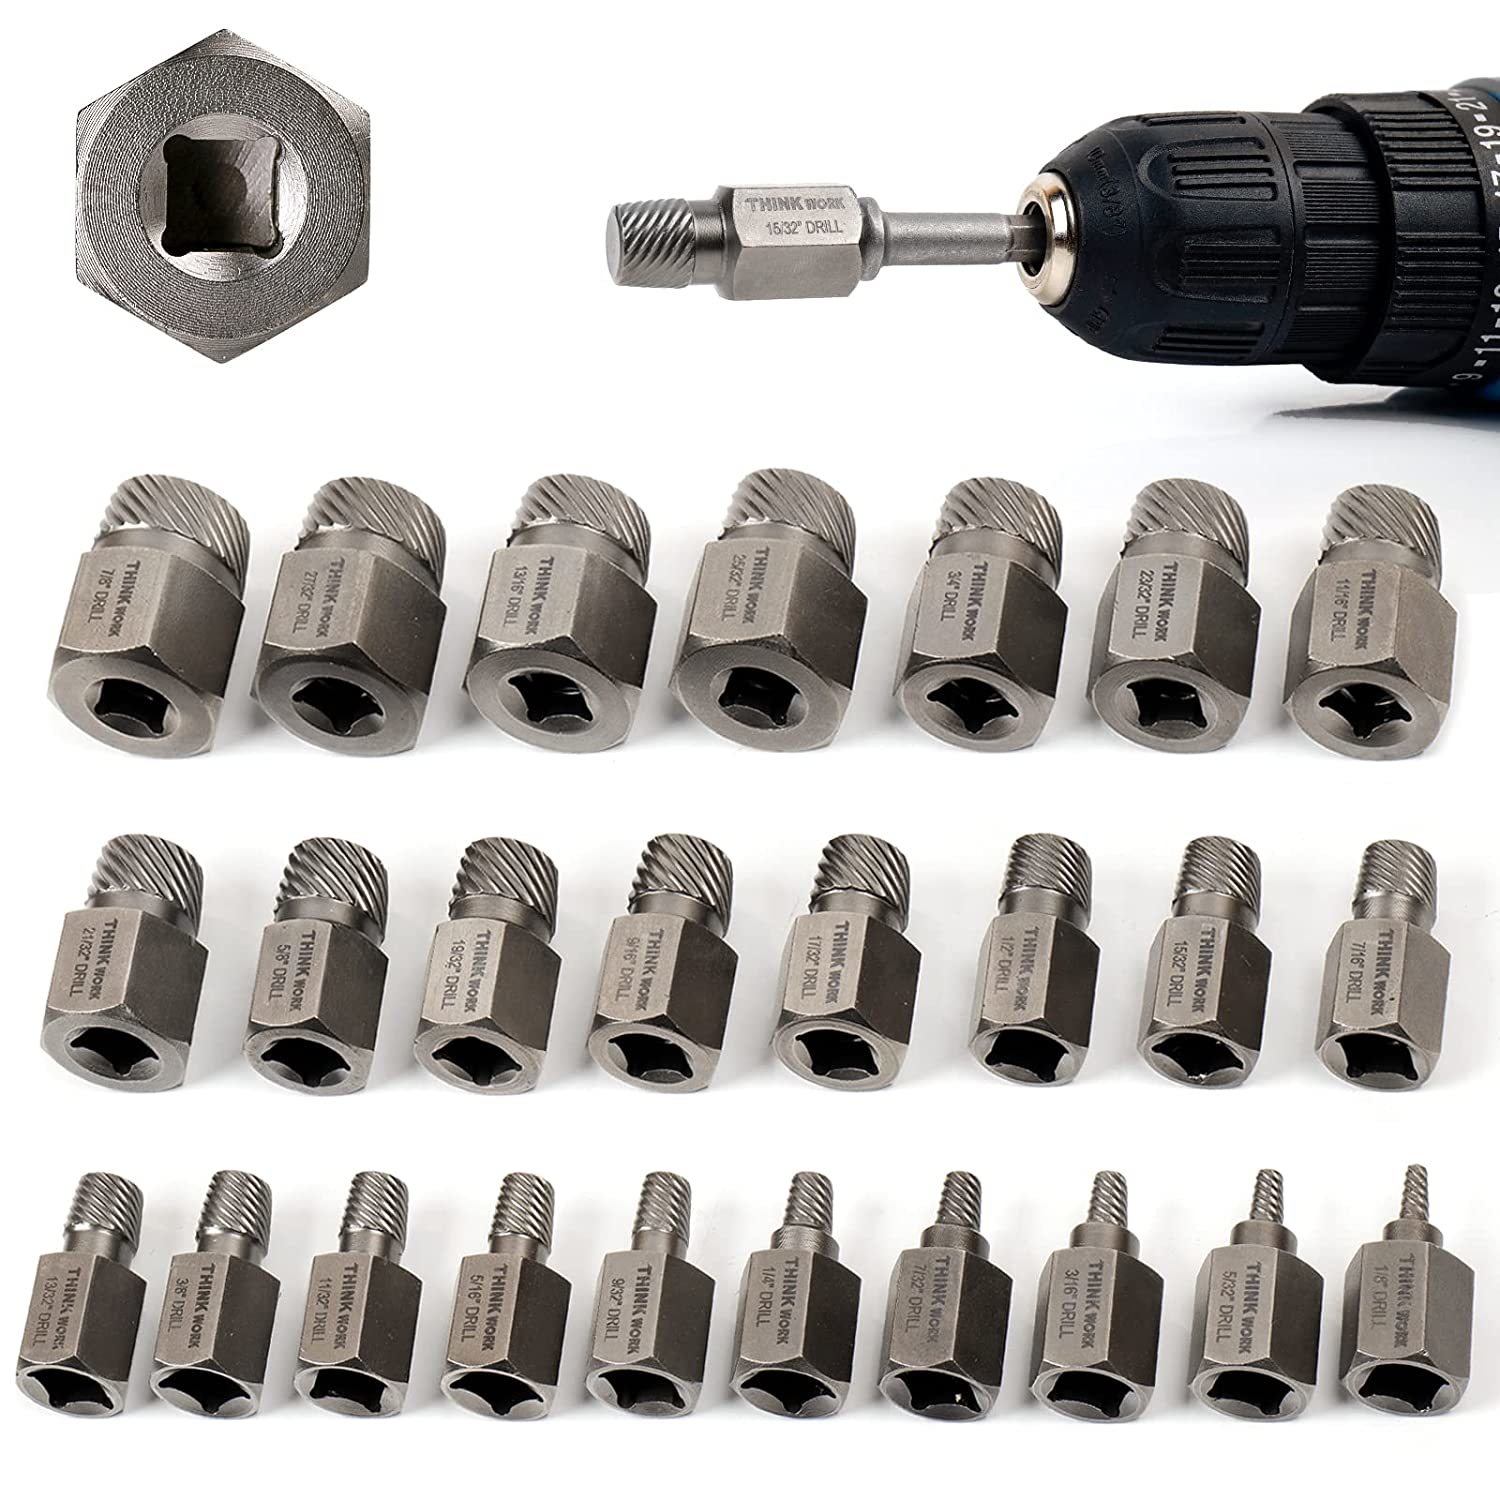 Upgrade Screw Extractor Set, 25-Piece 3/8" Inch Drive Easy Out Bolt Extractor Se - $73.99